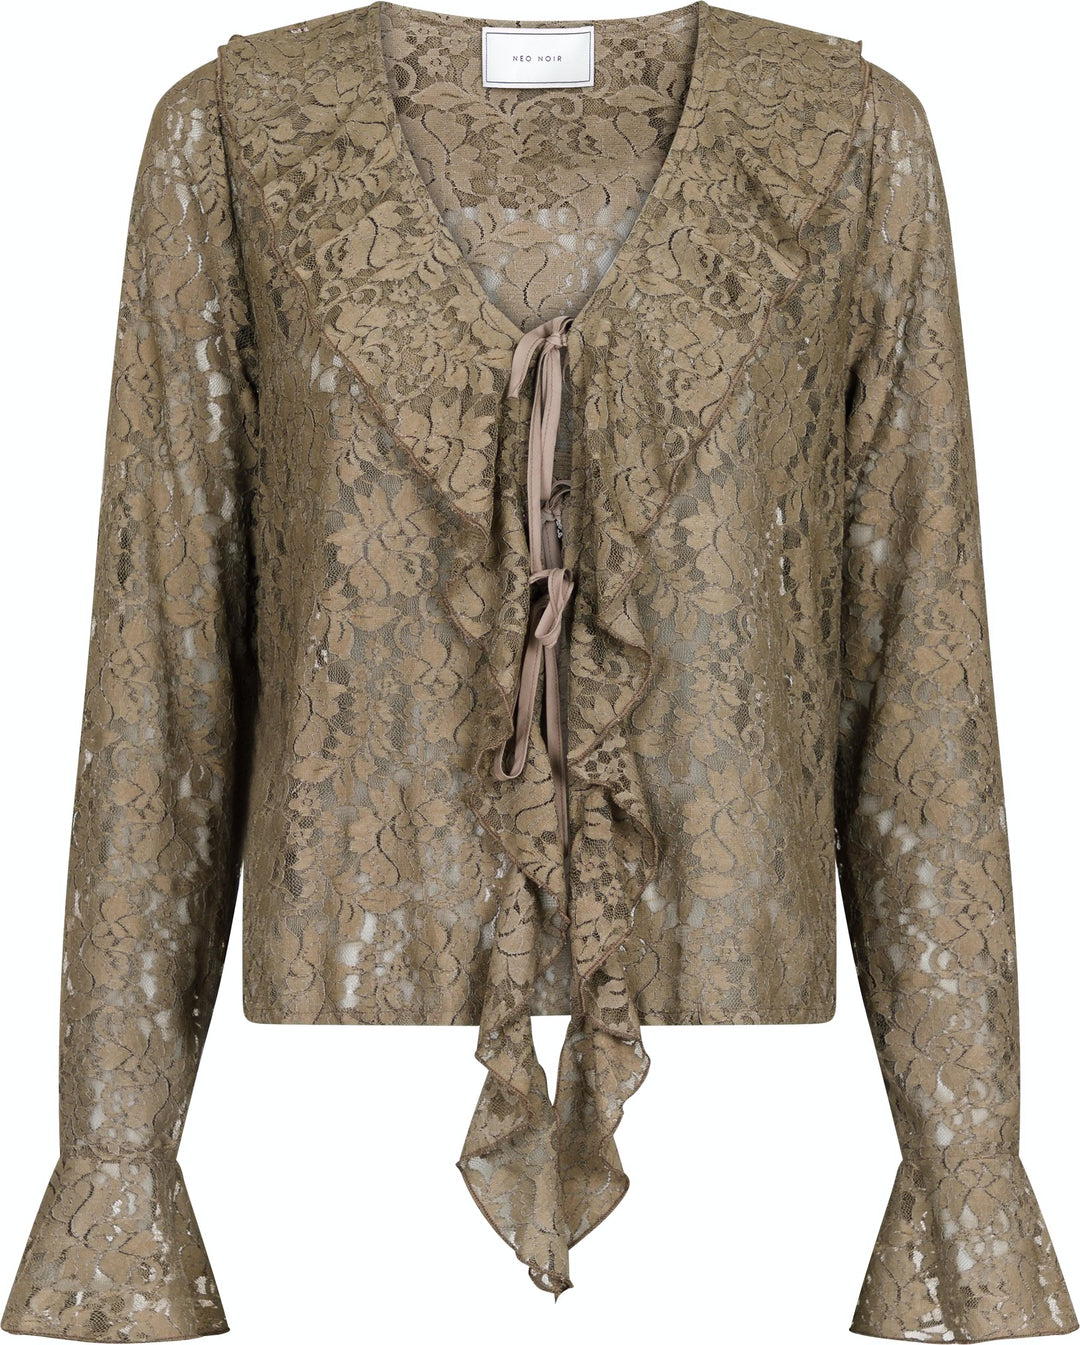 Neo Noir - Anika Lace Blouse - Taupe